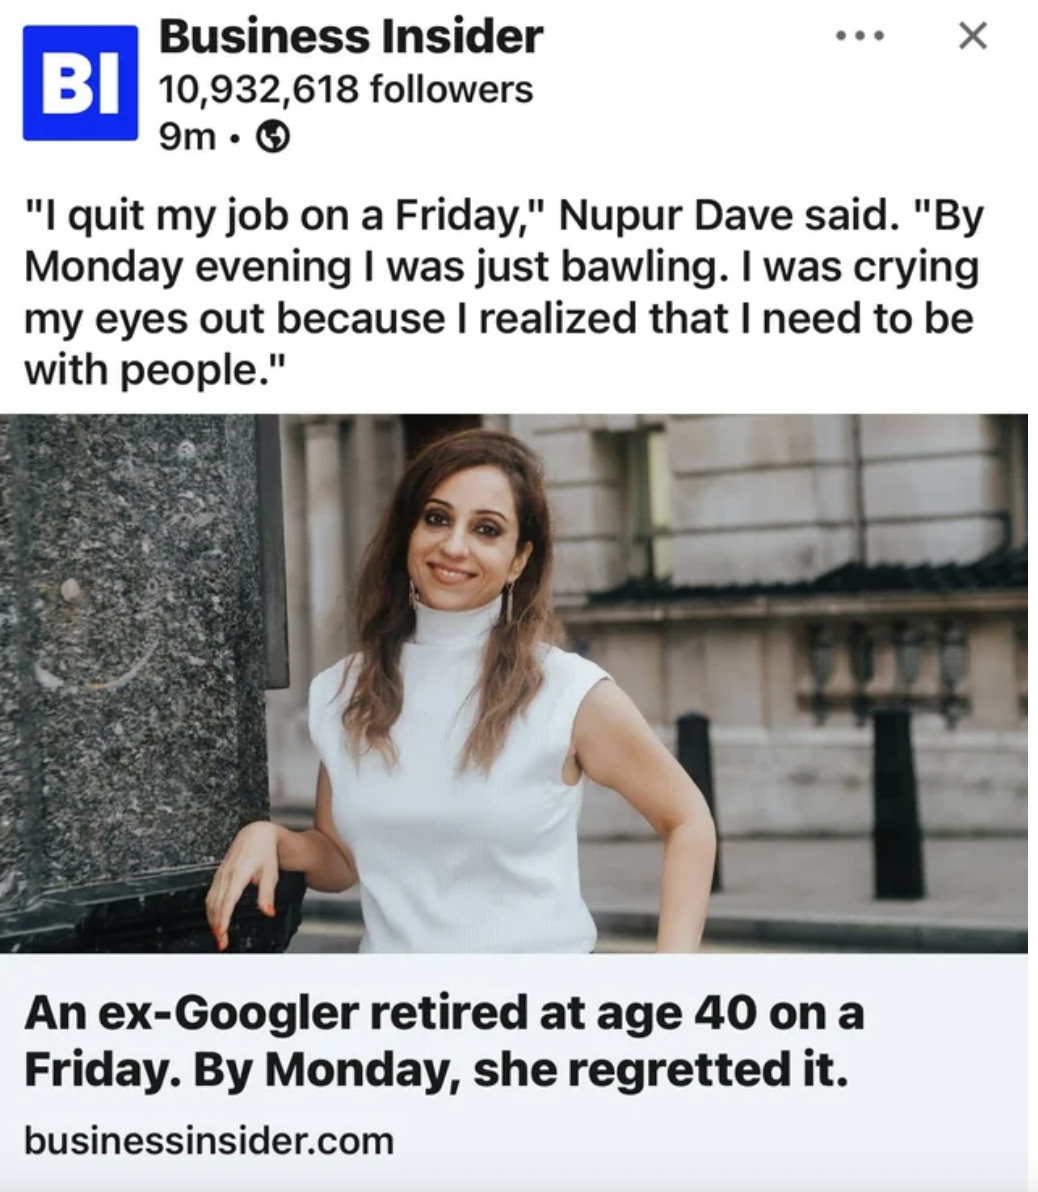 shoulder - Business Insider Bi 10,932,618 ers 9m X "I quit my job on a Friday," Nupur Dave said. "By Monday evening I was just bawling. I was crying my eyes out because I realized that I need to be with people." An exGoogler retired at age 40 on a Friday.